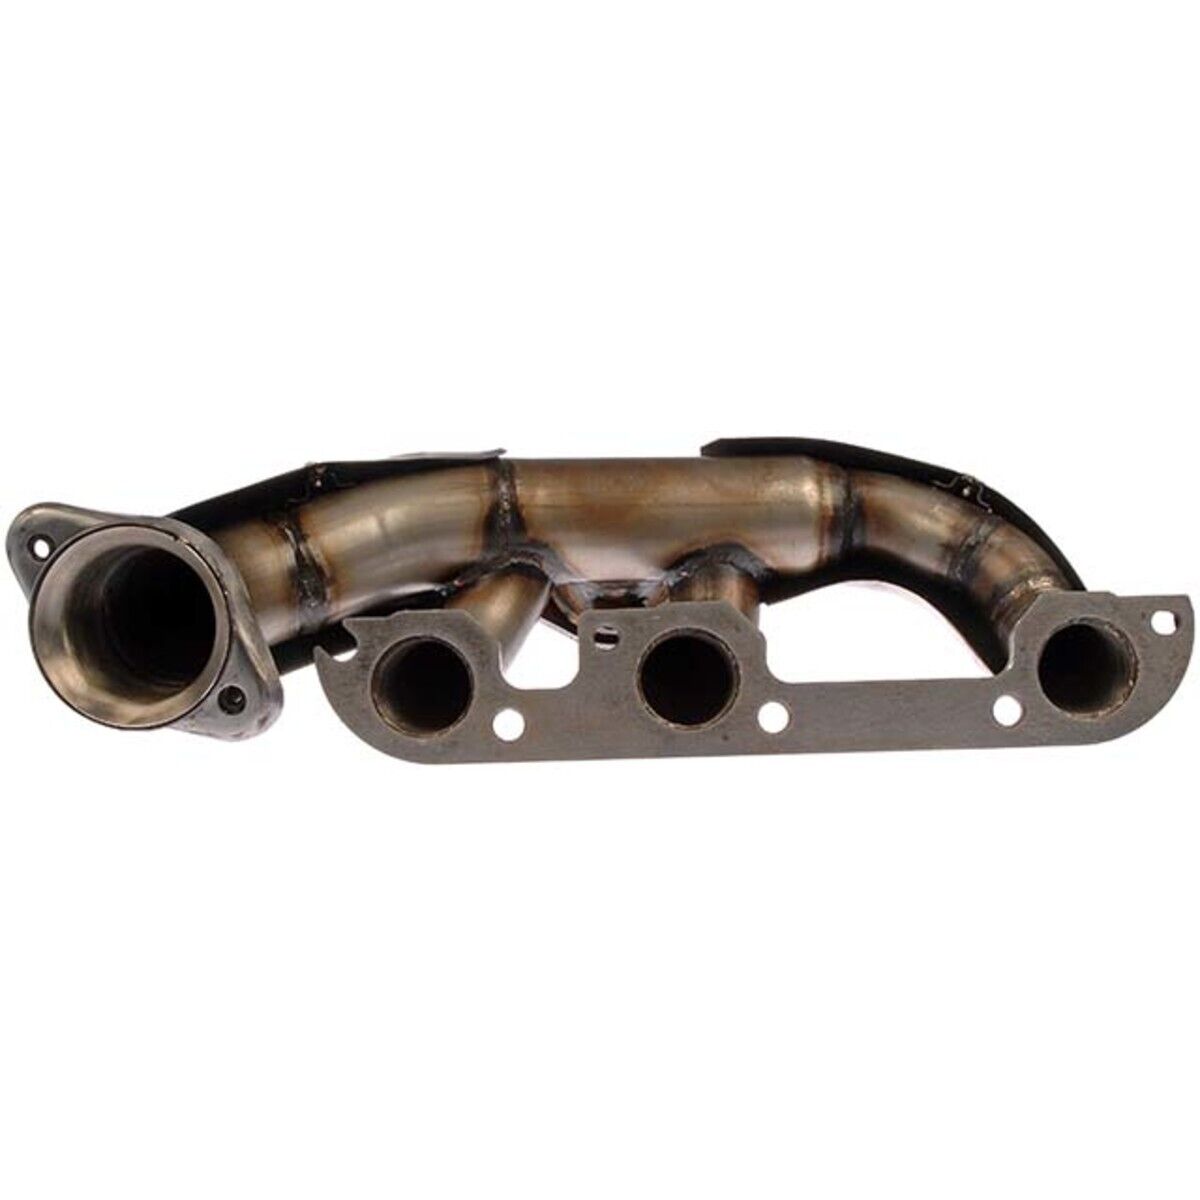 674-656 Dorman Exhaust Manifold Kit Rear for Olds Le Sabre NINETY EIGHT LeSabre